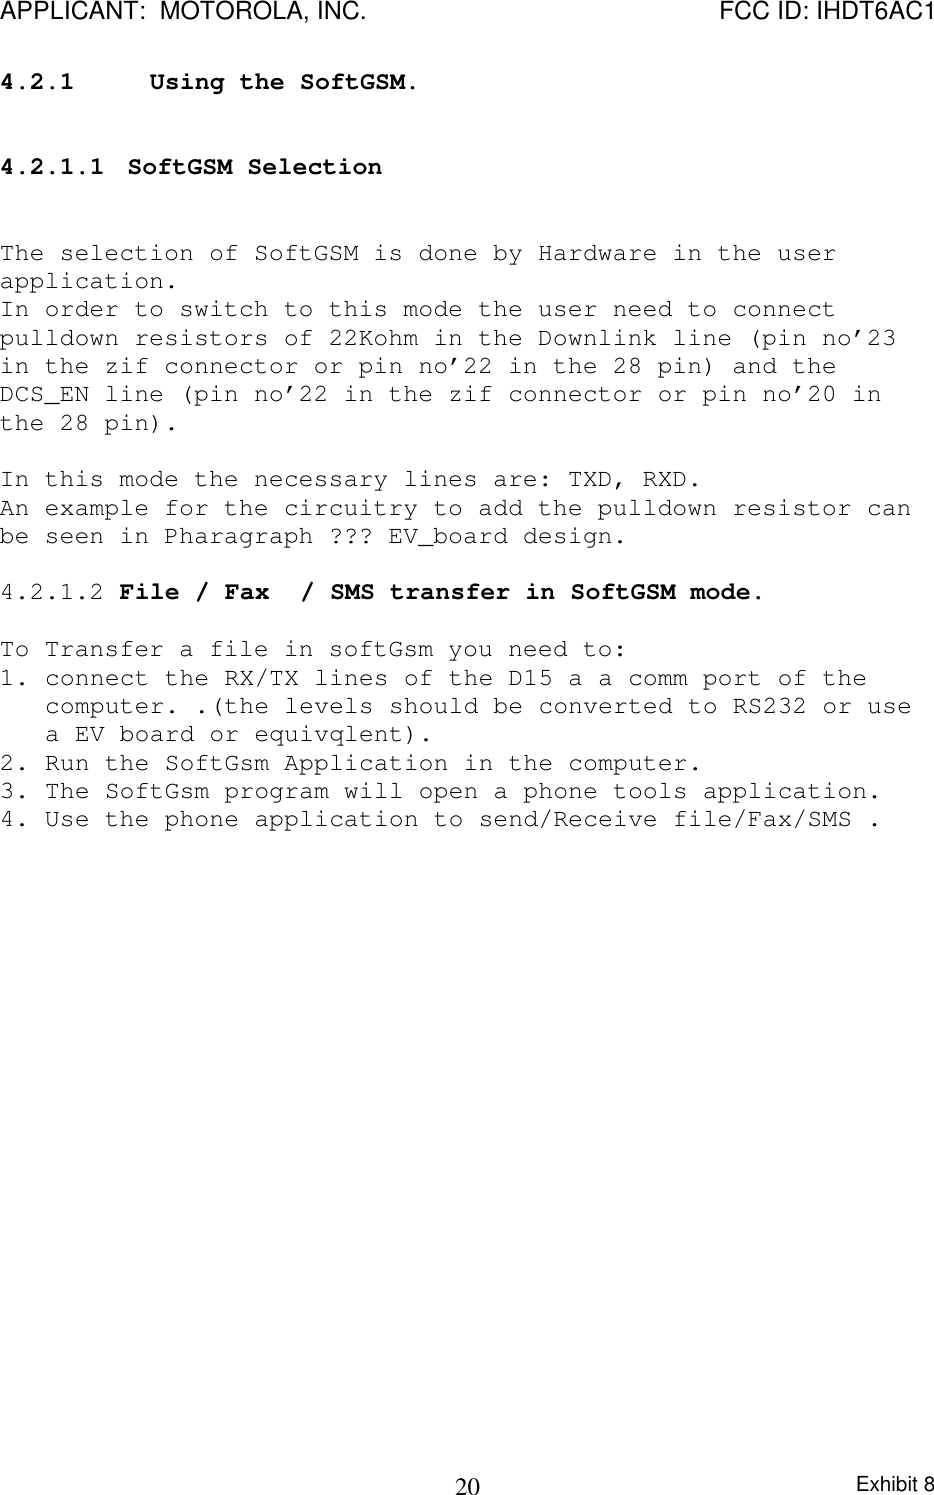 APPLICANT:  MOTOROLA, INC. FCC ID: IHDT6AC1Exhibit 8204.2.1 Using the SoftGSM.4.2.1.1  SoftGSM SelectionThe selection of SoftGSM is done by Hardware in the userapplication.In order to switch to this mode the user need to connectpulldown resistors of 22Kohm in the Downlink line (pin no’23in the zif connector or pin no’22 in the 28 pin) and theDCS_EN line (pin no’22 in the zif connector or pin no’20 inthe 28 pin).In this mode the necessary lines are: TXD, RXD.An example for the circuitry to add the pulldown resistor canbe seen in Pharagraph ??? EV_board design.4.2.1.2 File / Fax  / SMS transfer in SoftGSM mode.To Transfer a file in softGsm you need to:1. connect the RX/TX lines of the D15 a a comm port of thecomputer. .(the levels should be converted to RS232 or usea EV board or equivqlent).2. Run the SoftGsm Application in the computer.3. The SoftGsm program will open a phone tools application.4. Use the phone application to send/Receive file/Fax/SMS .